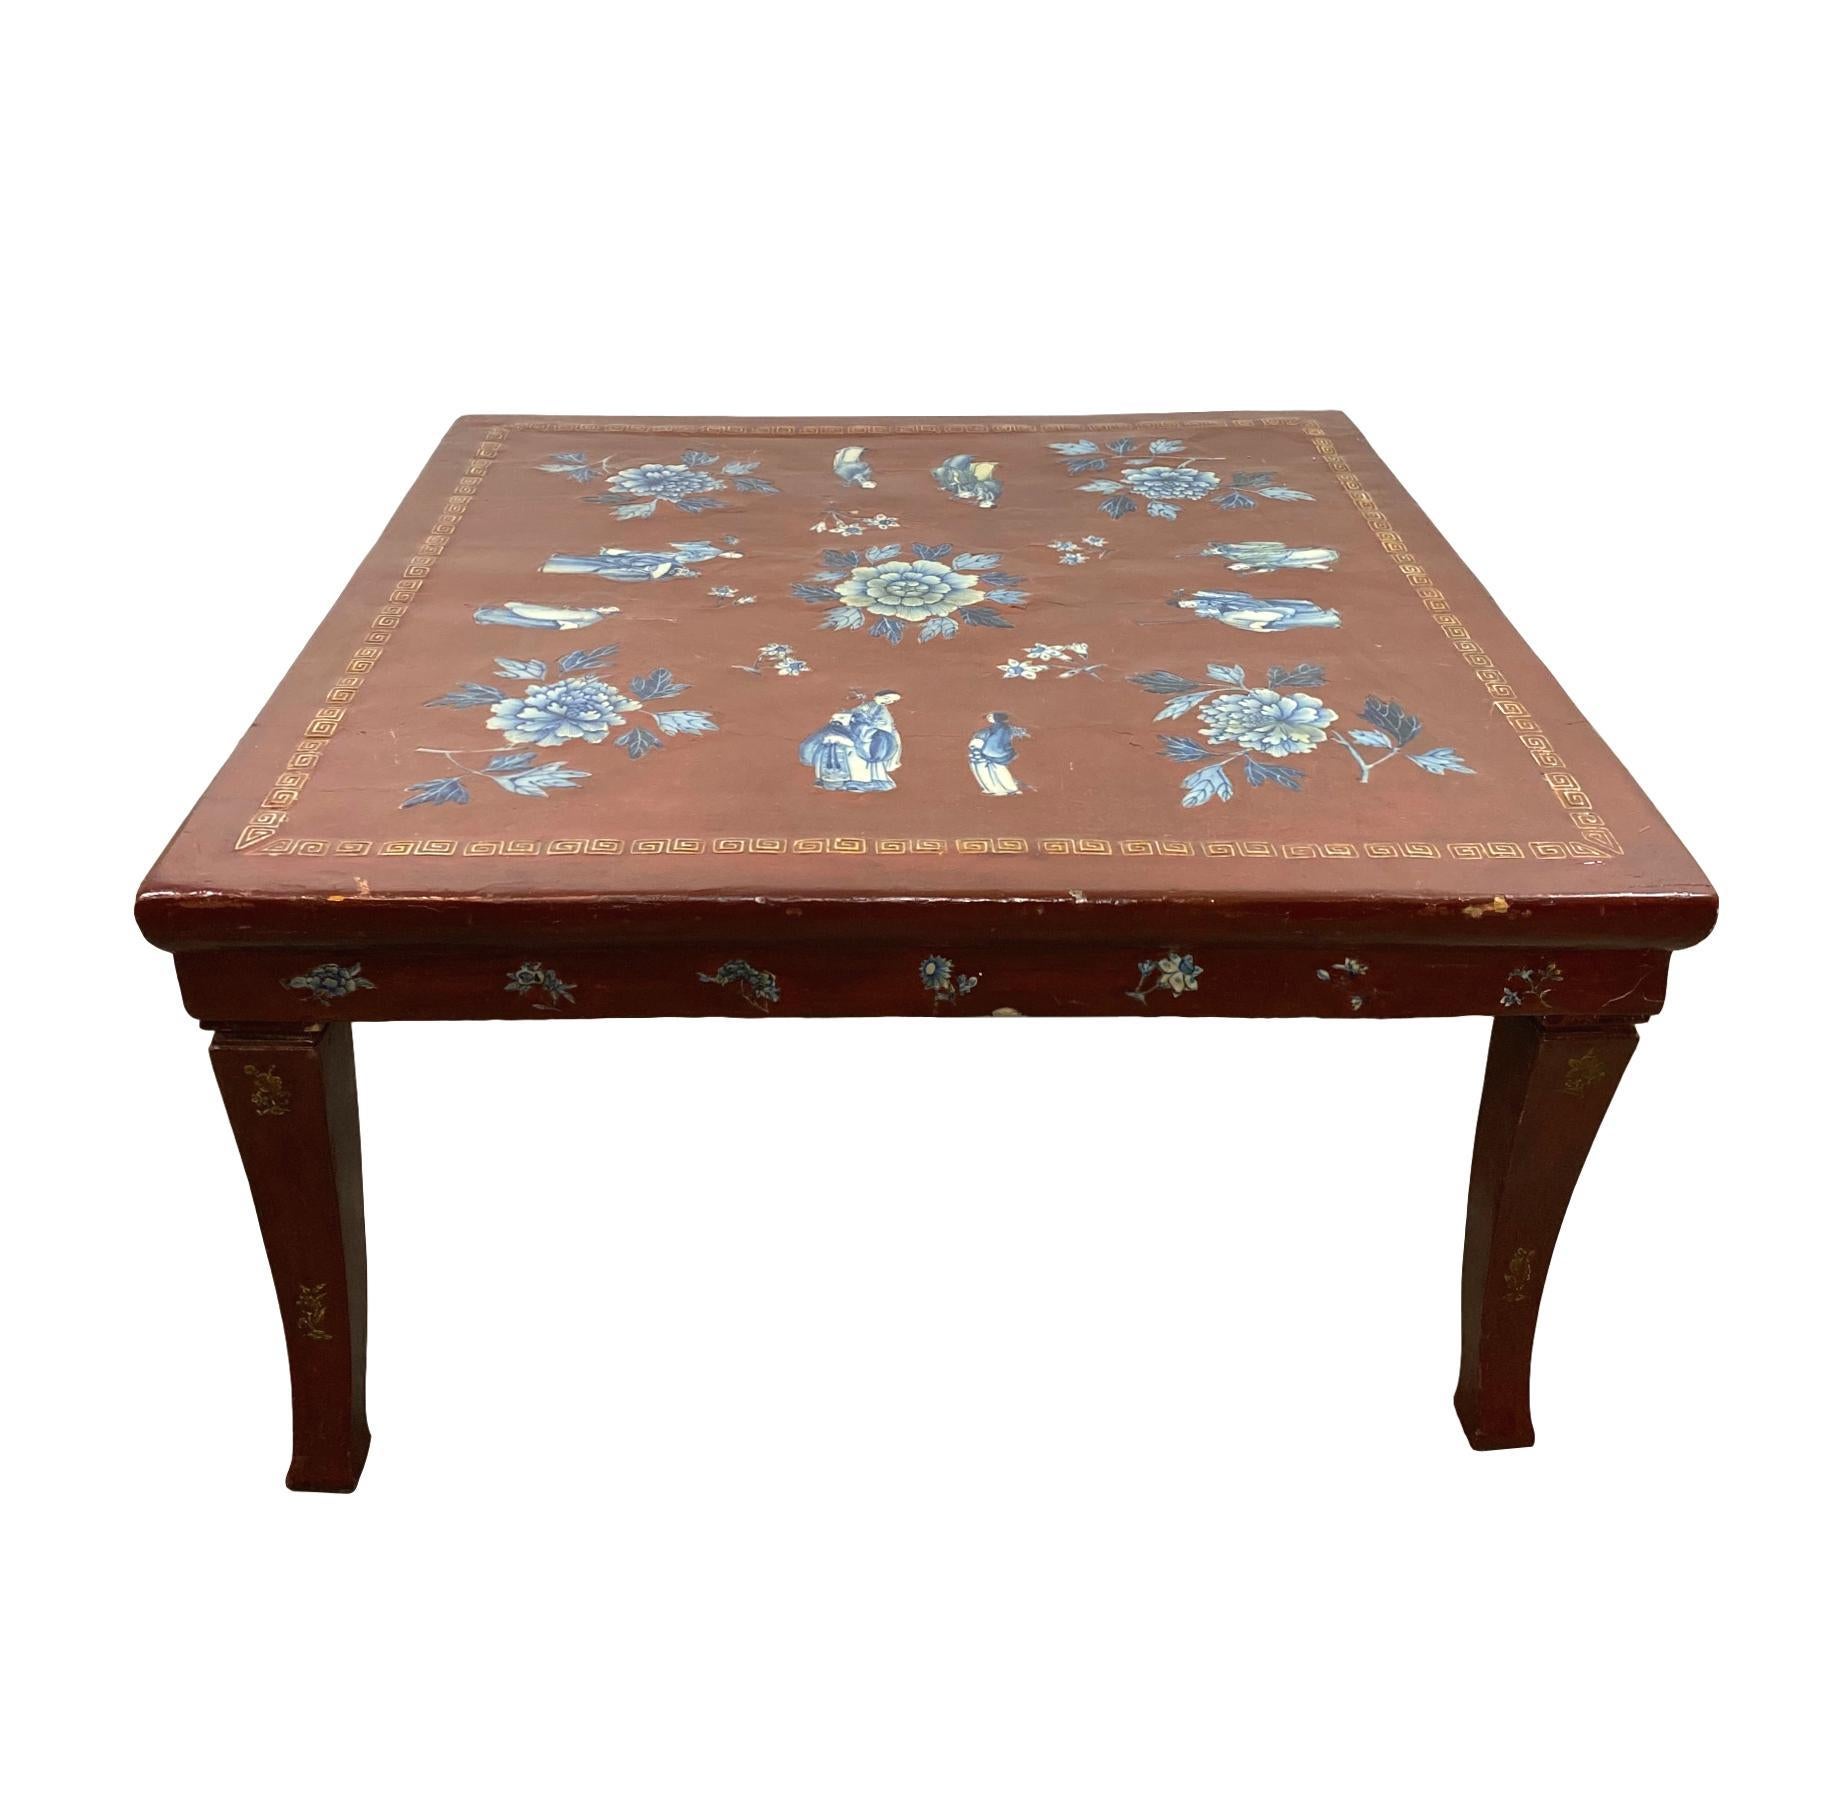 Elm Chinese Red Lacquered Kang Table with Blue and White Porcelain Inlays